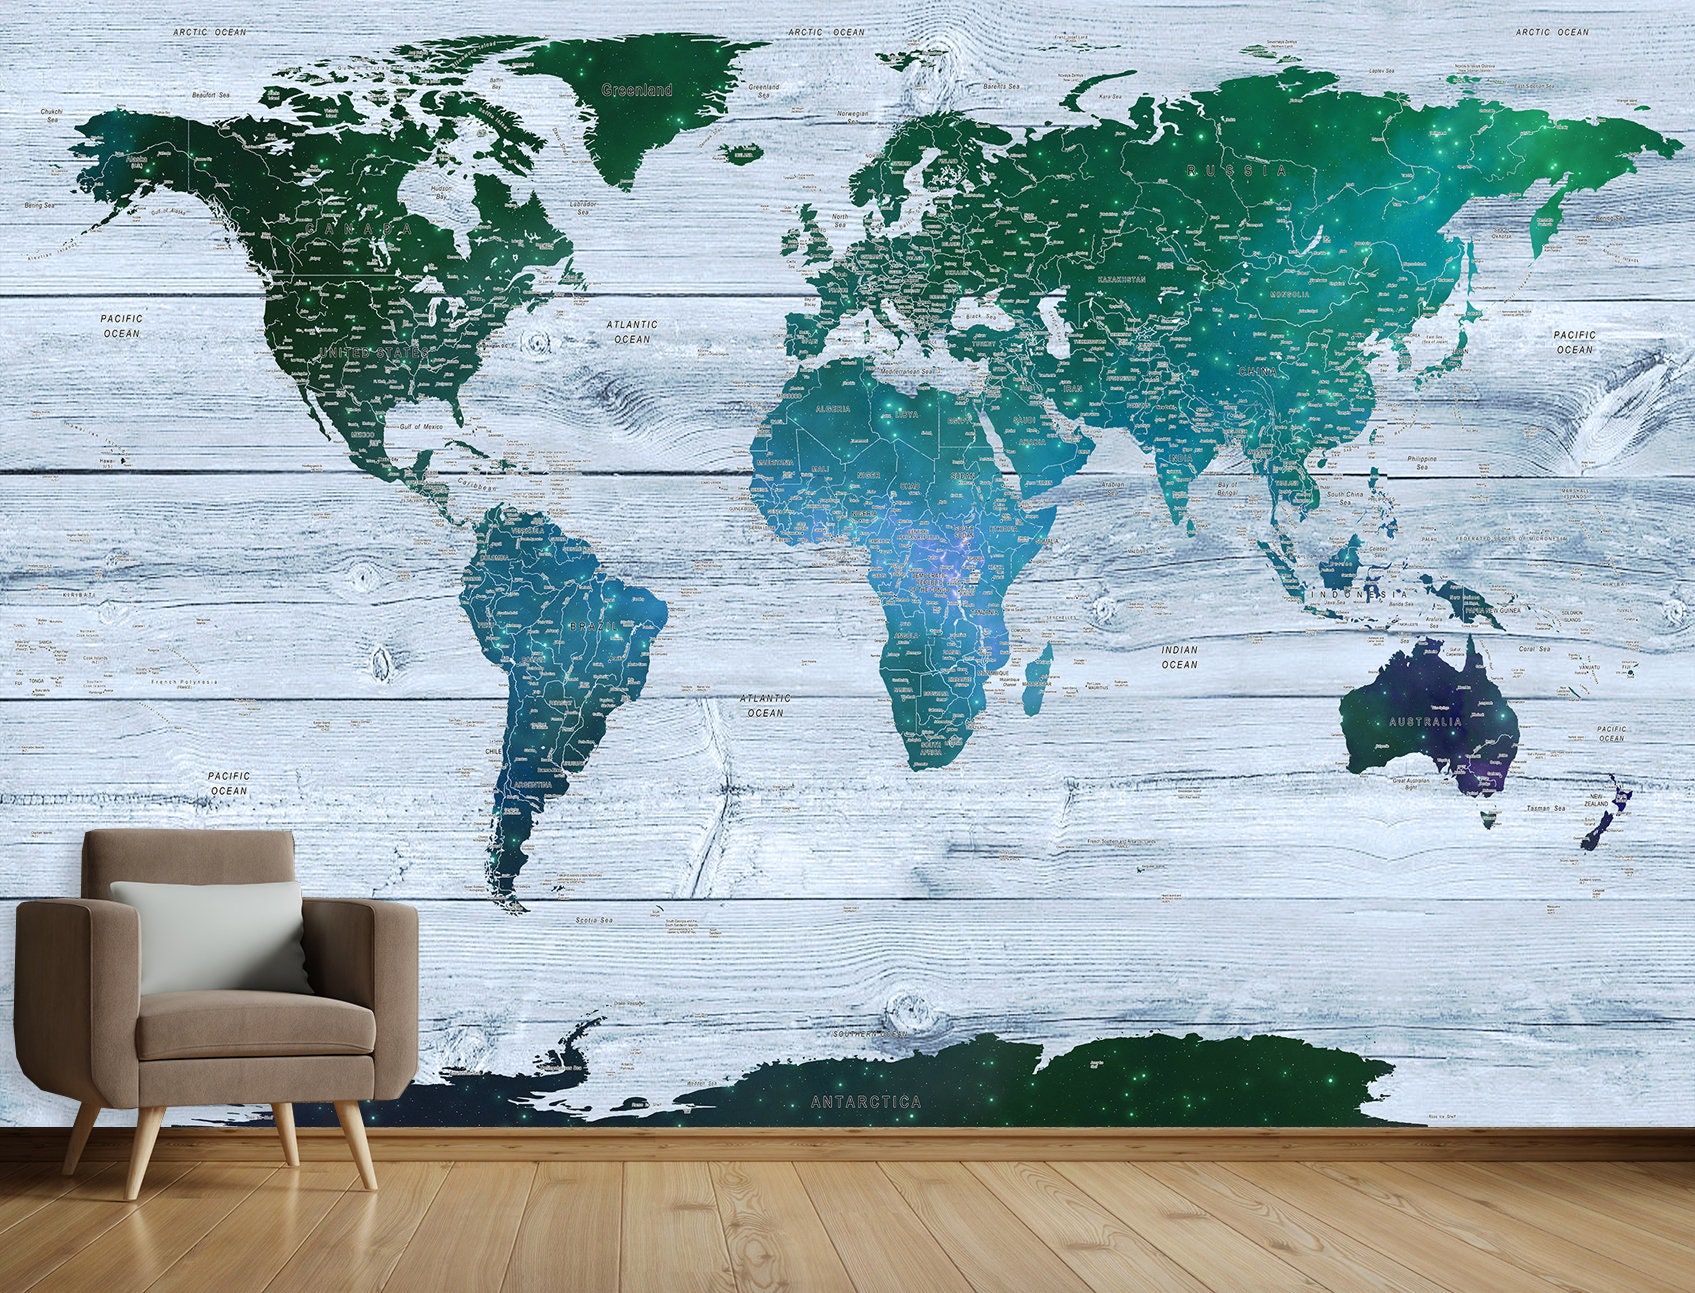 Mural World Map Decor Wallpeper Peel And Stick Wall Mural Map | Etsy Within Most Recently Released Globe Wall Art (View 2 of 20)